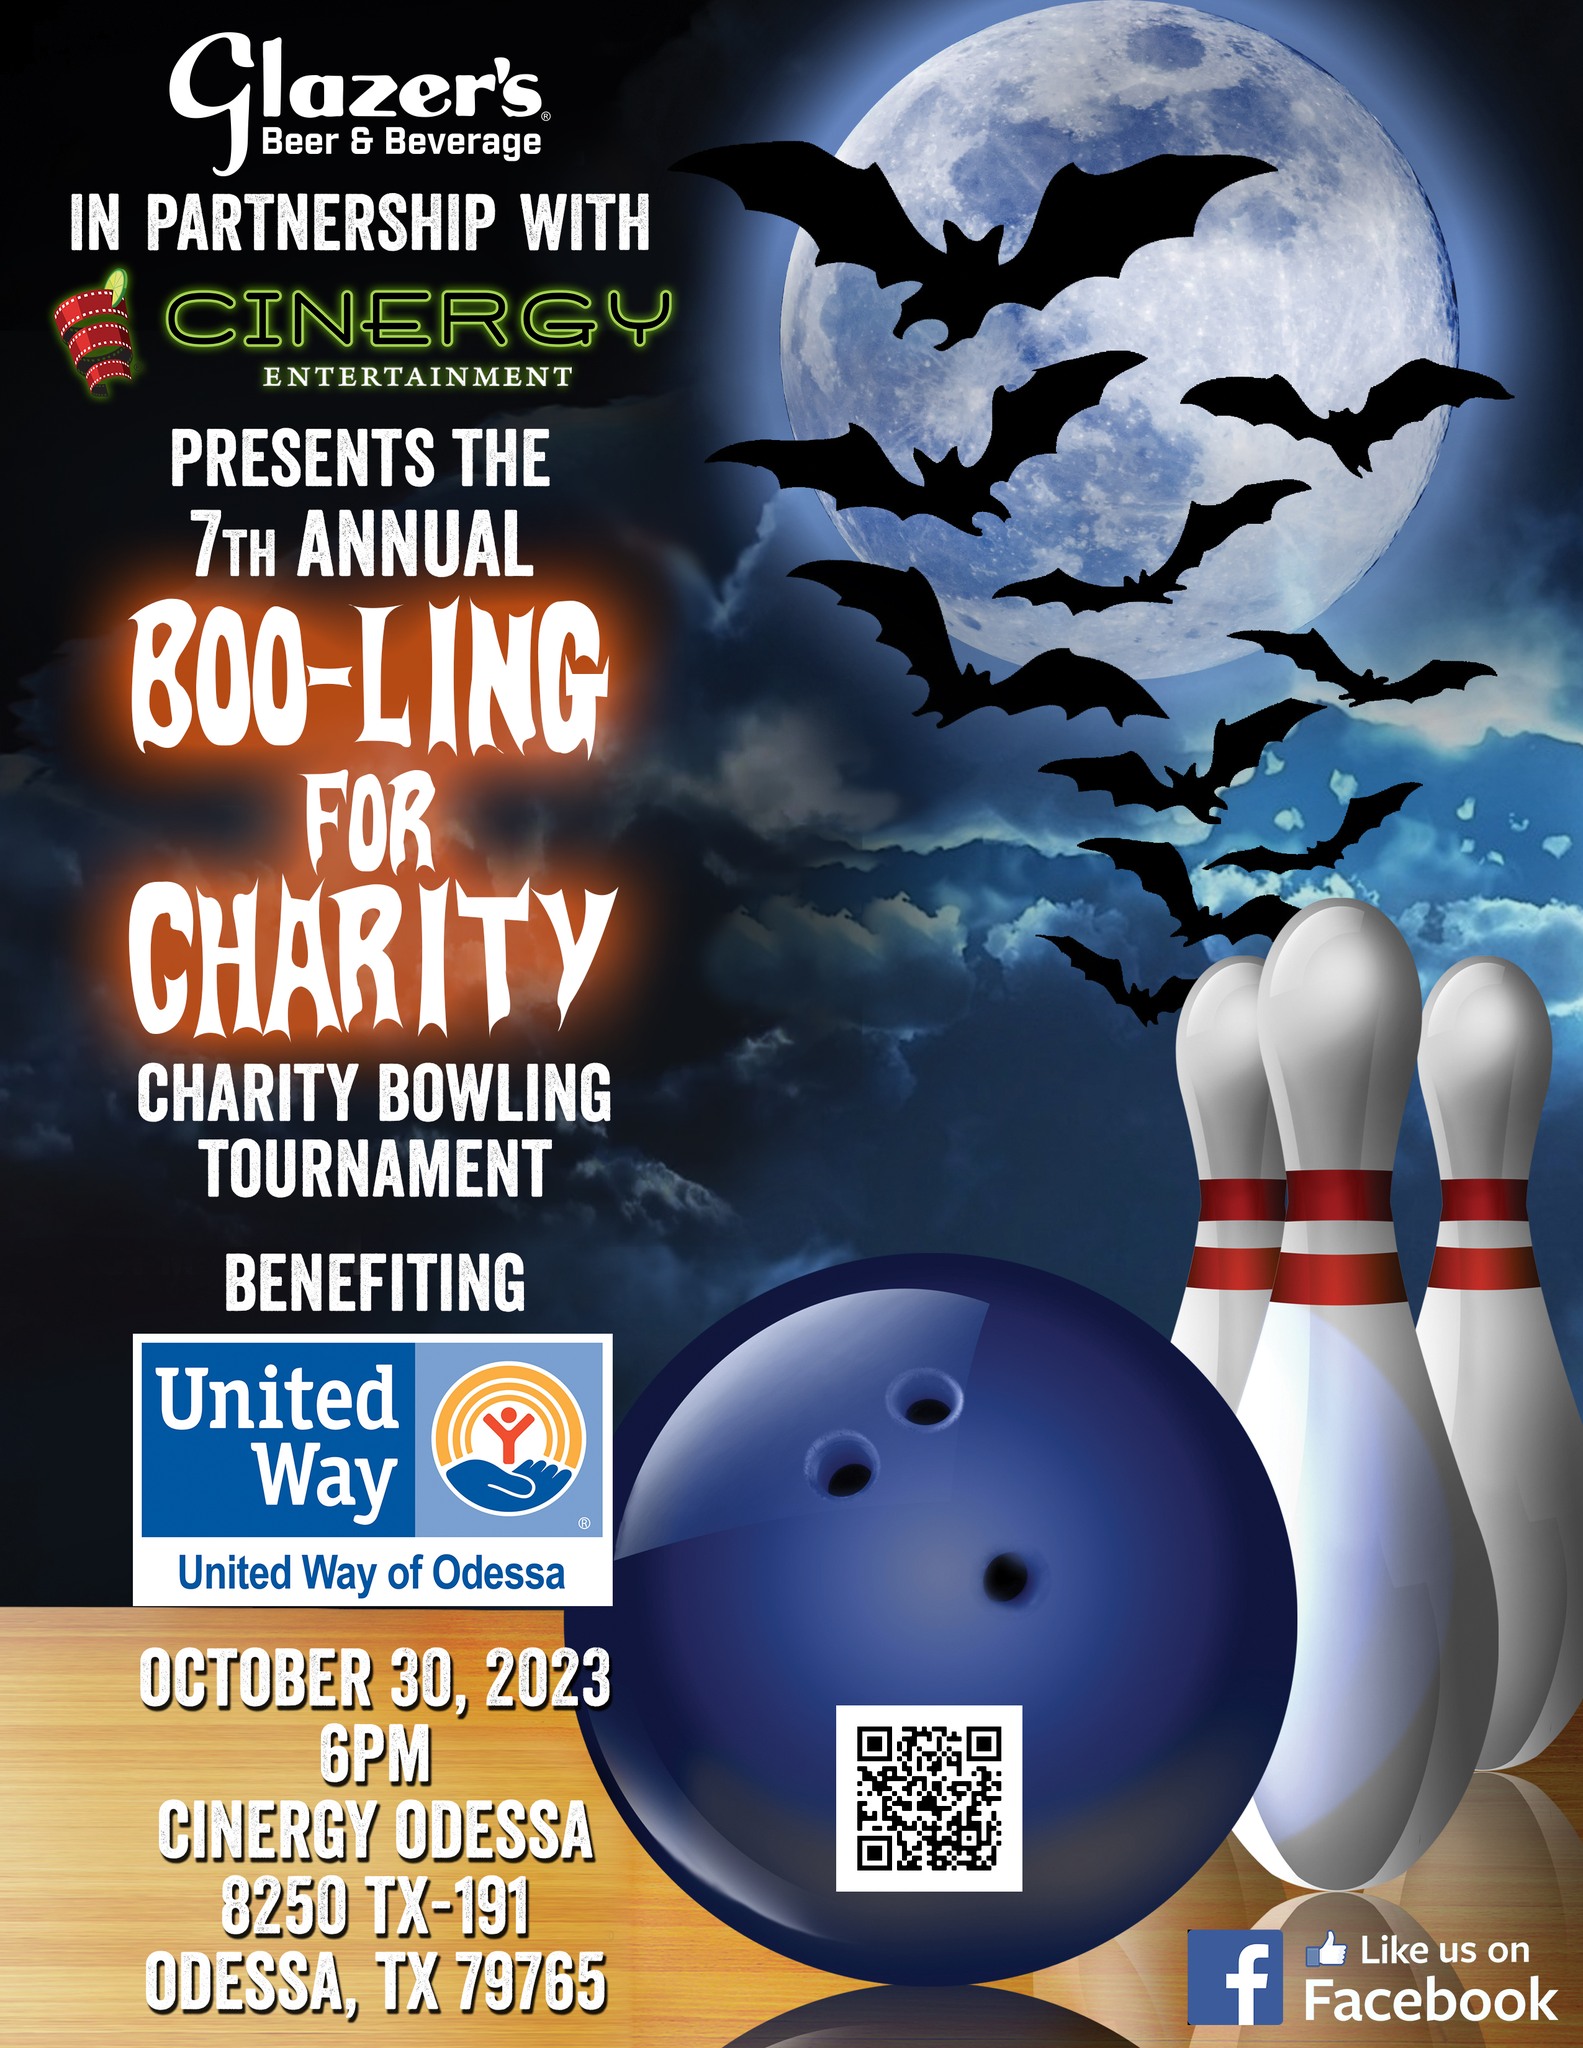 Boo-ling for charity with the United Way